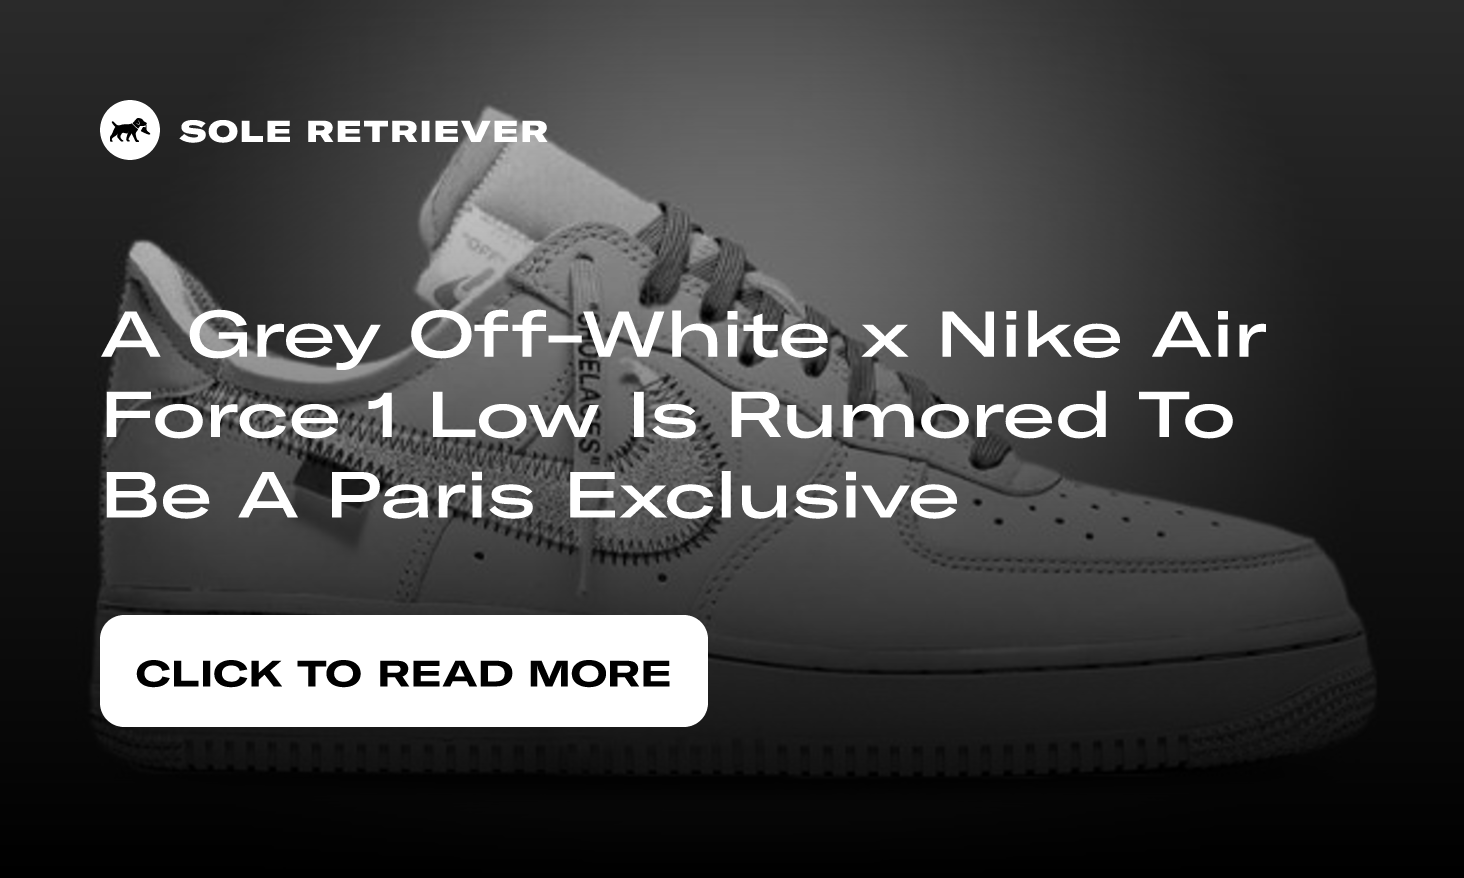 The New Grey Off White Air Force 1 Got Us Saying Oui Oui!